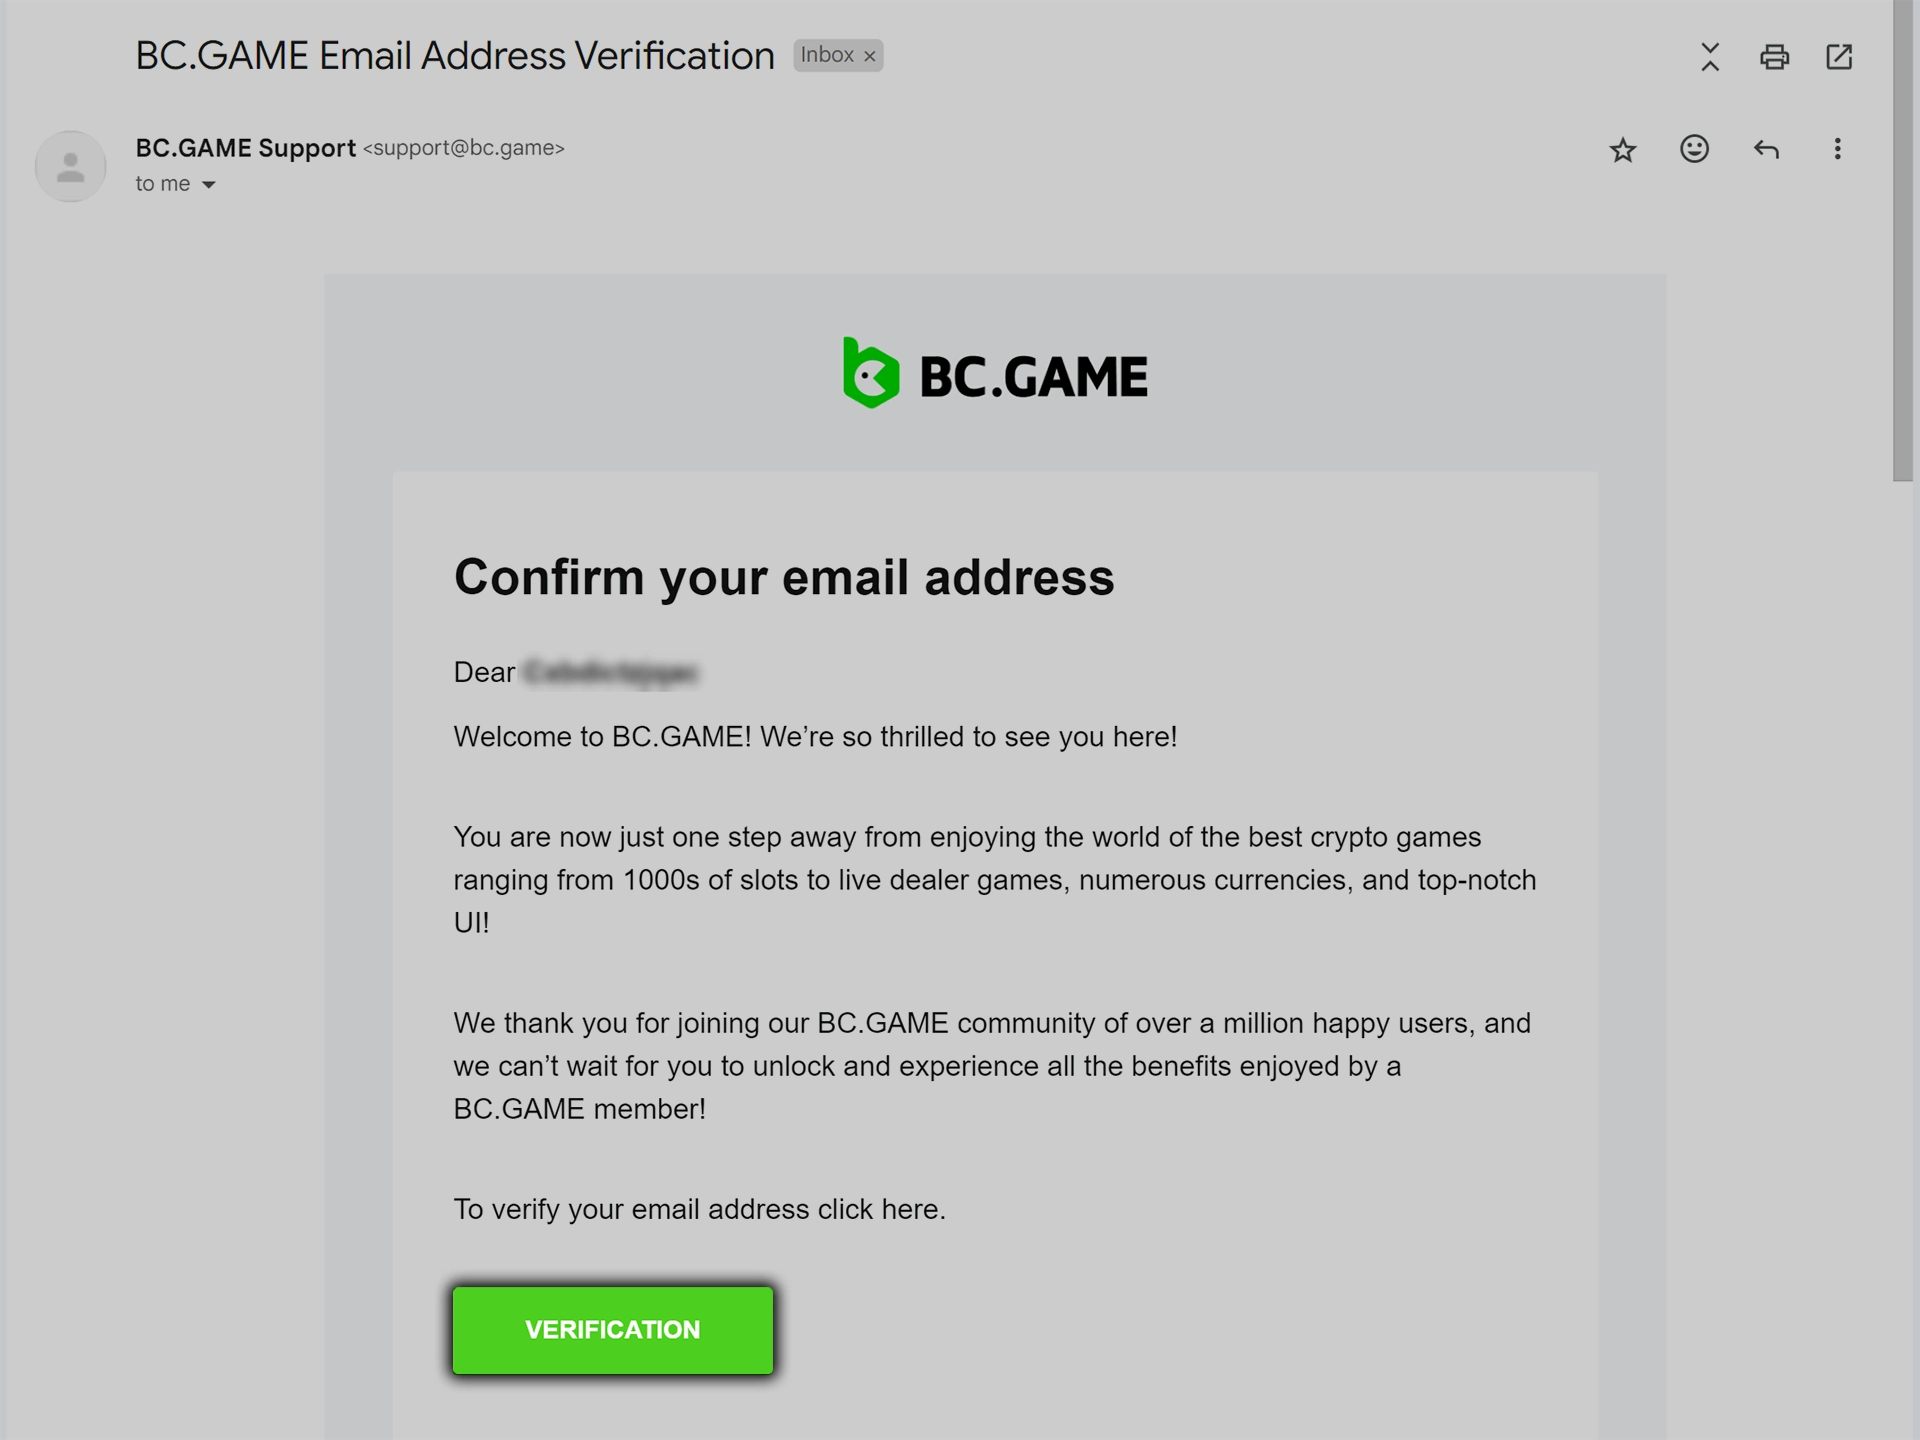 Open the email from BC.game and follow the link to complete the verification.